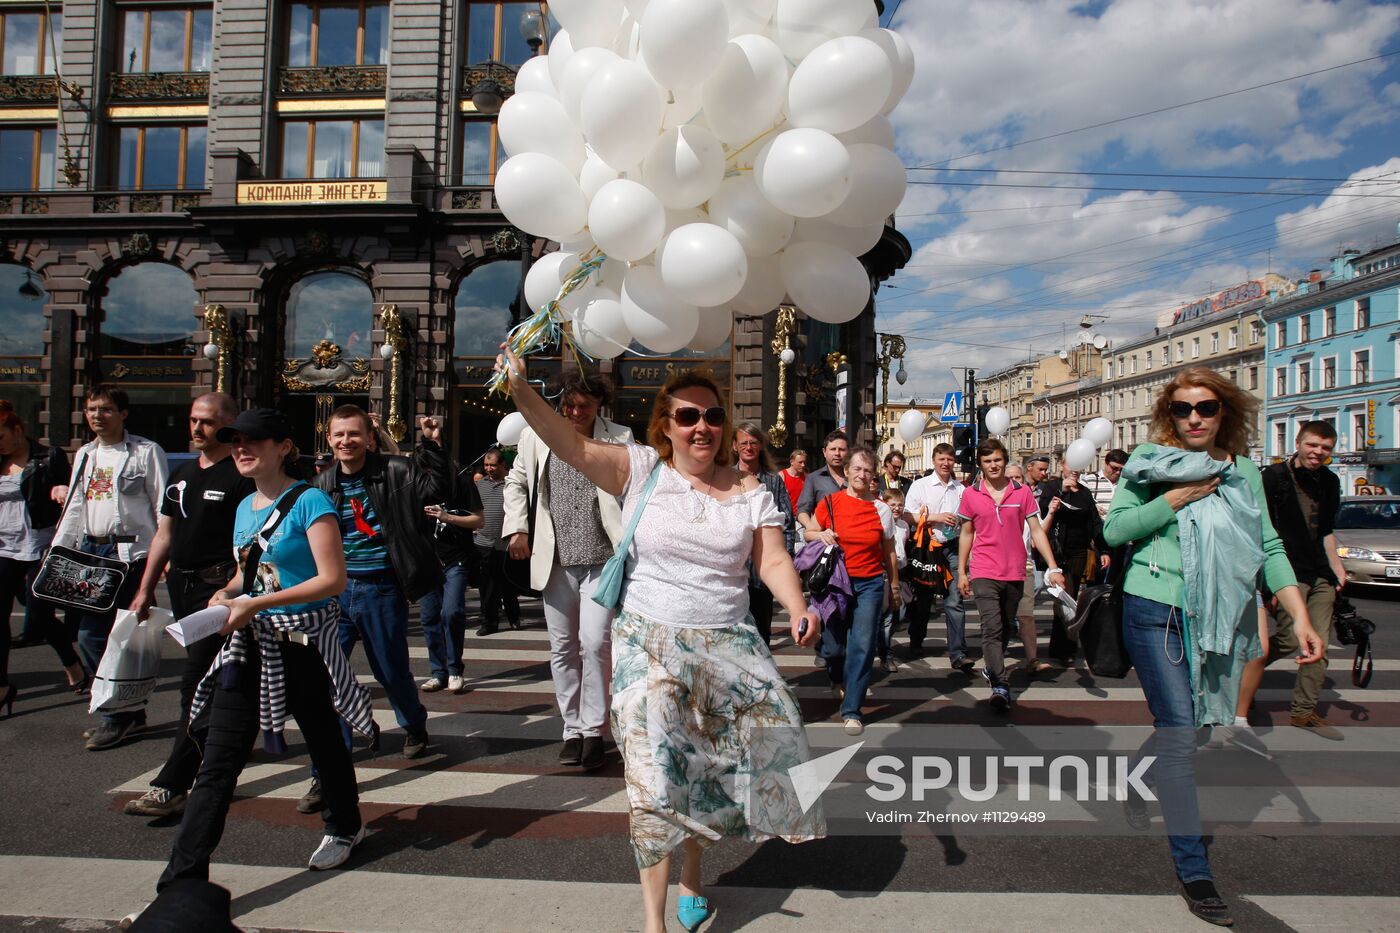 Opposition go on "Trial Stroll" in St Petersburg